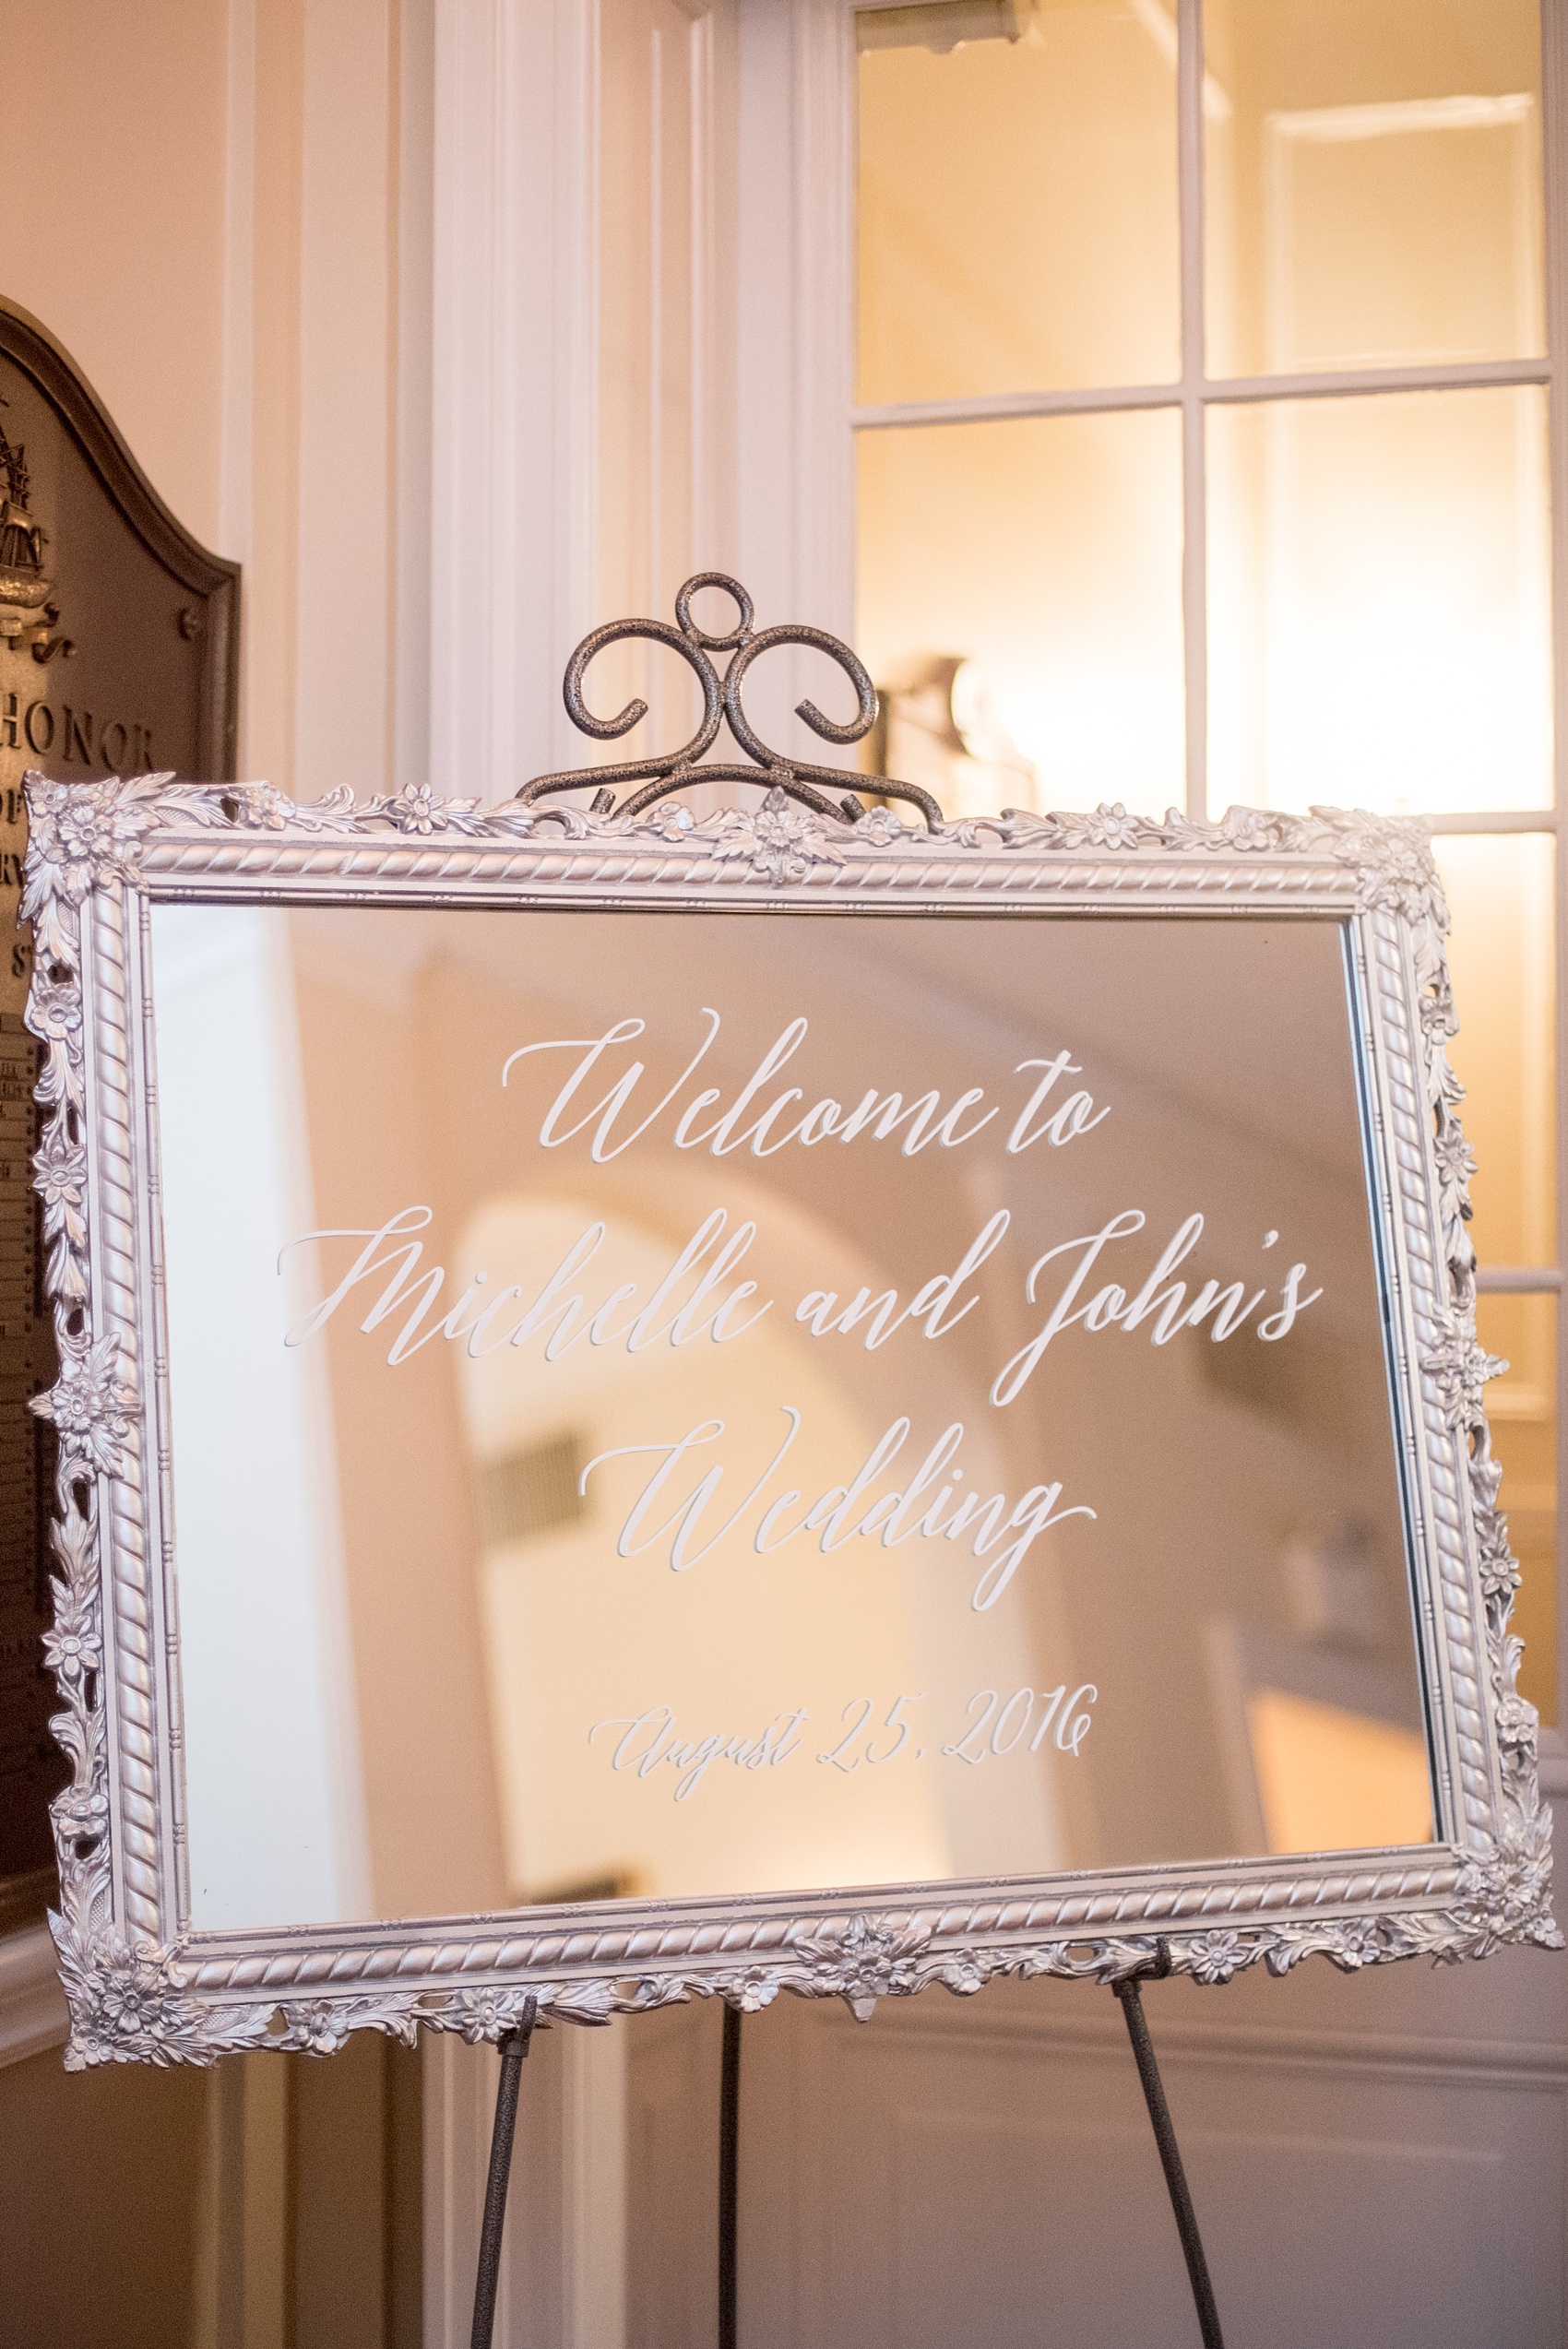 Mikkel Paige Photography photos of a luxury wedding in NYC. Image of the bride and groom's welcome sign, calligraphy on a framed mirror, in India House in lower Manhattan.